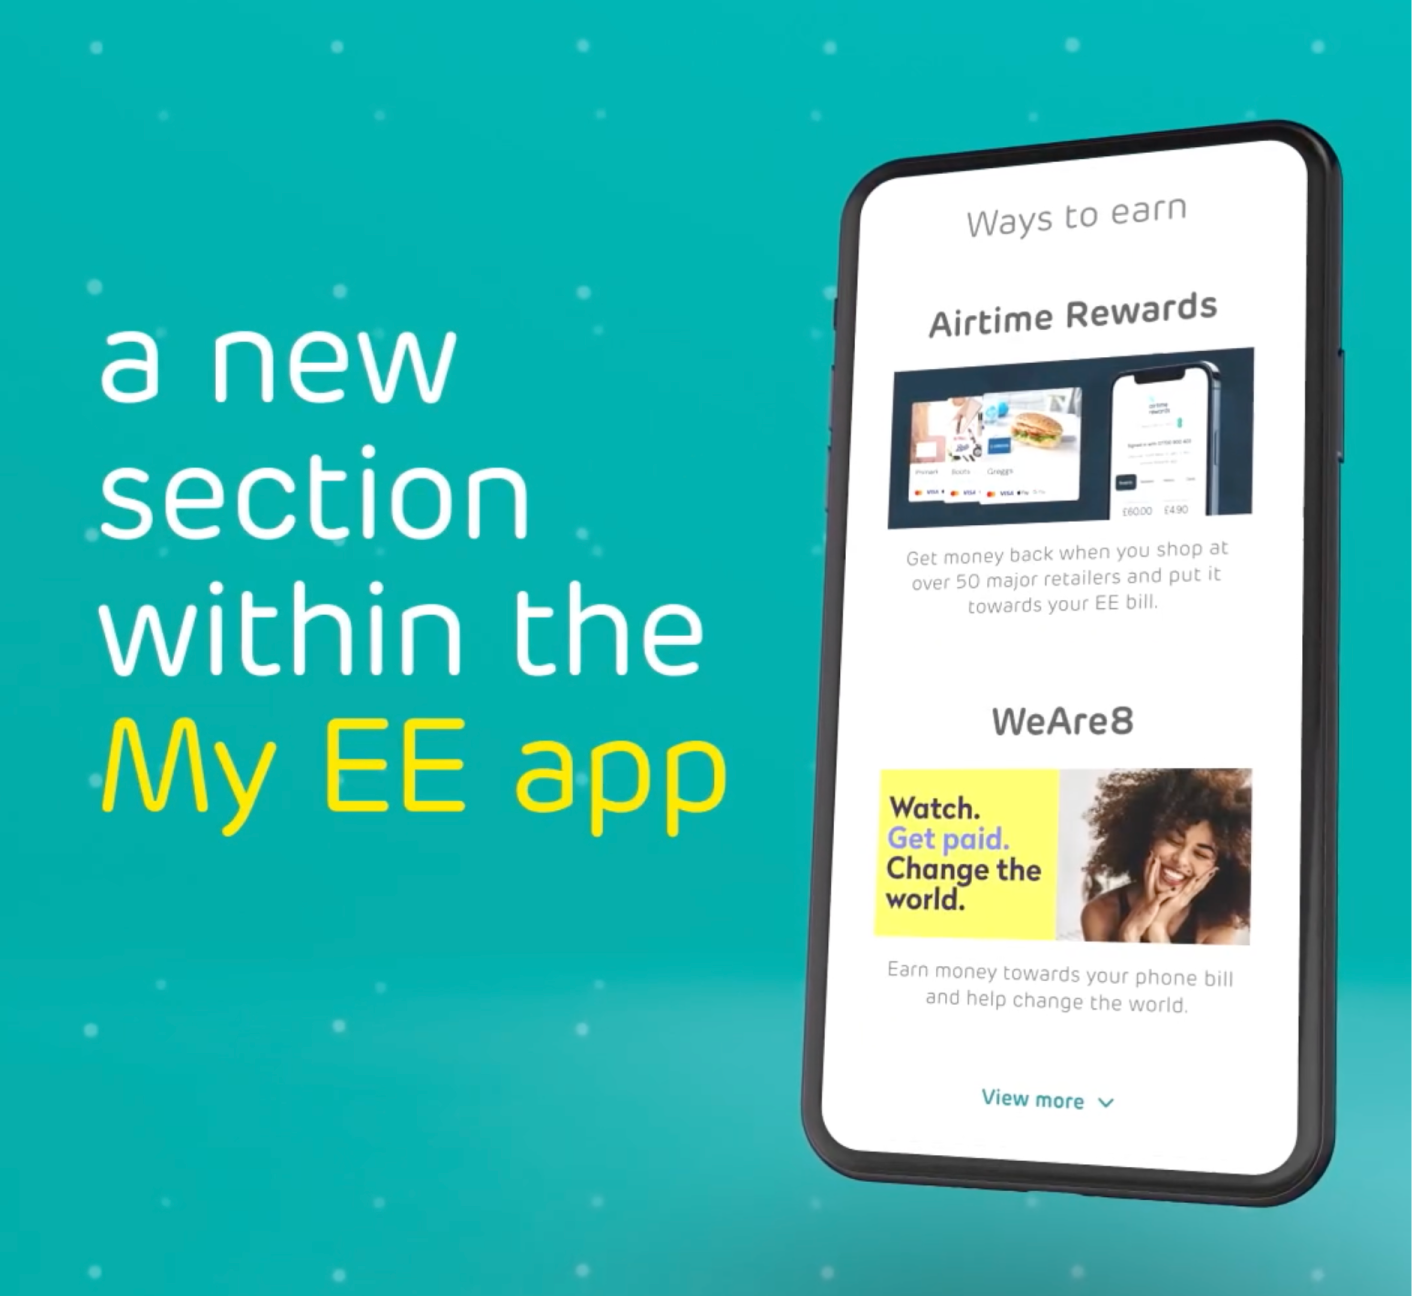 An advert for the My EE Airtime Rewards web app